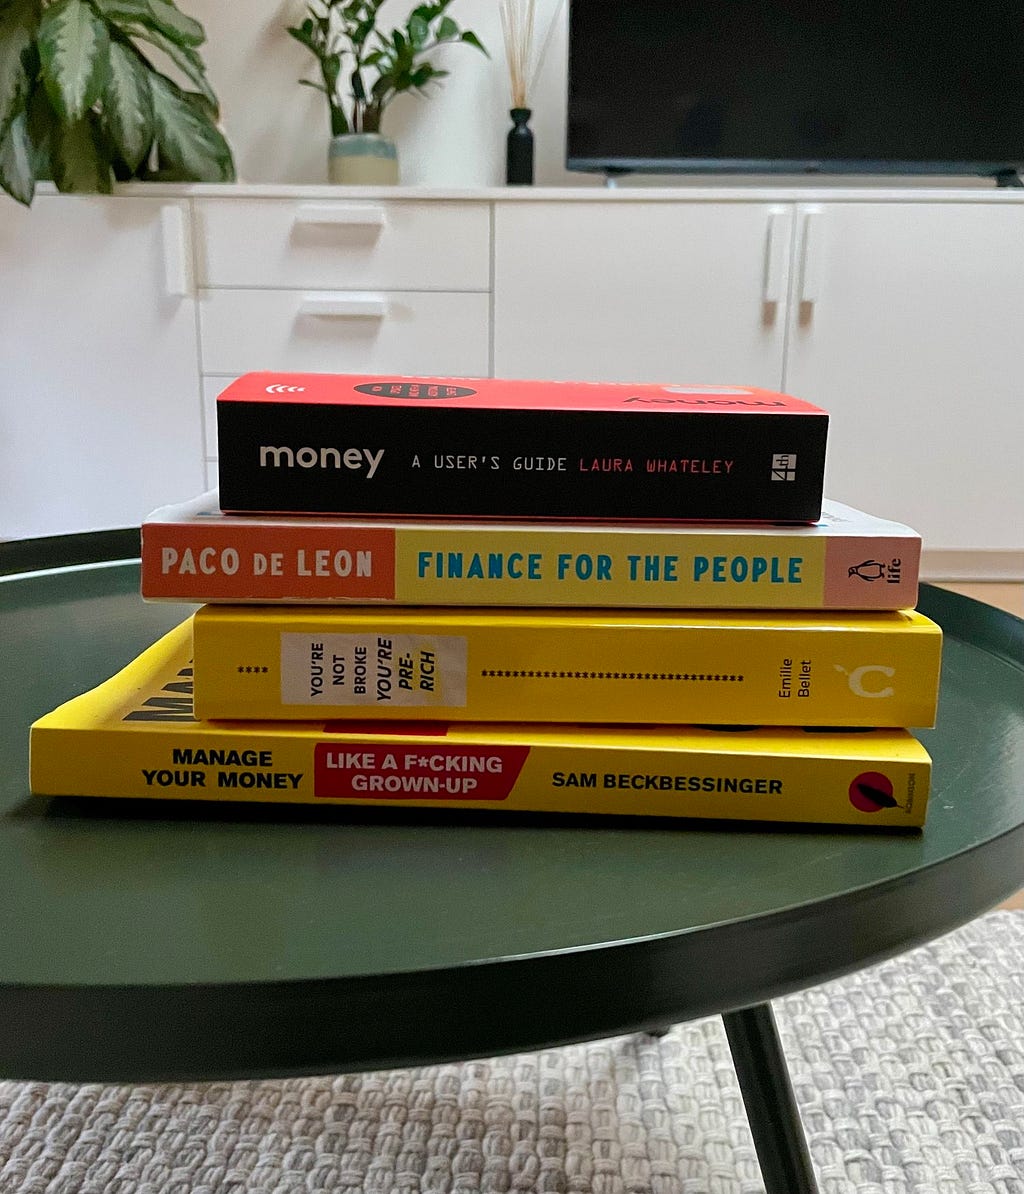 A pile of books around the topic of money